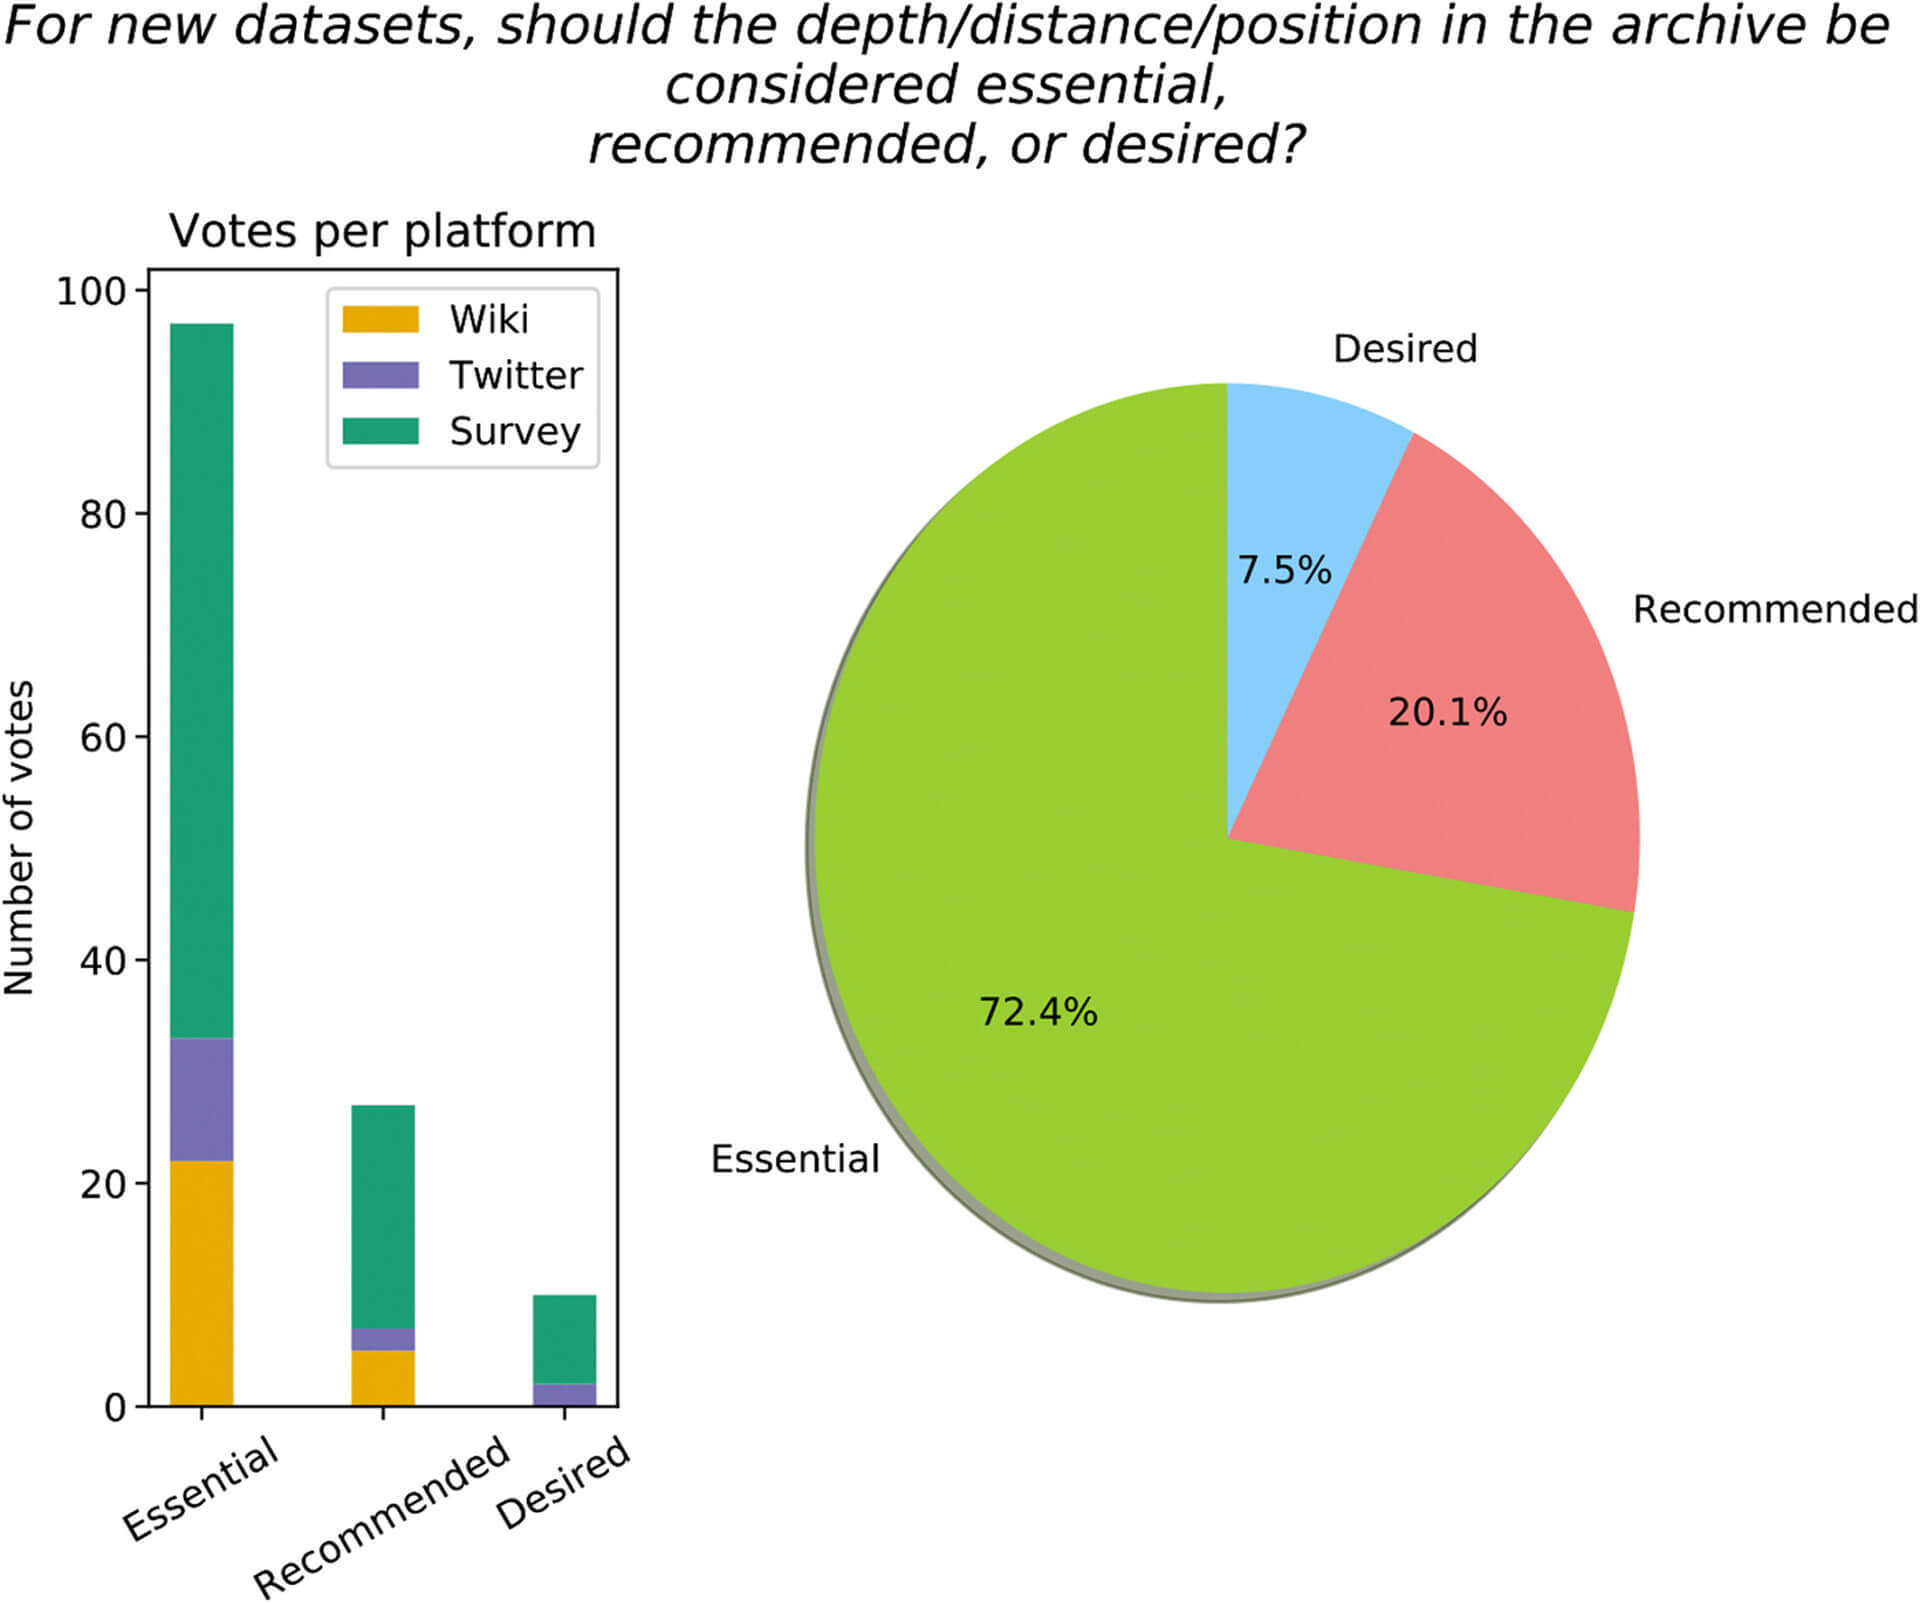 Example of a survey question for a new dataset. The histogram represents the number of votes on each platform (orange: LinkedEarth, purple: Twitter, and green: Google survey). The pie chart represents the fraction of the votes for essential (green), recommended (pink), and desired (blue). Source: “PaCTS 1.0: A Crowdsourced Reporting Standard for Paleoclimate Data,” Paleoceanography and Paleoclimatology.